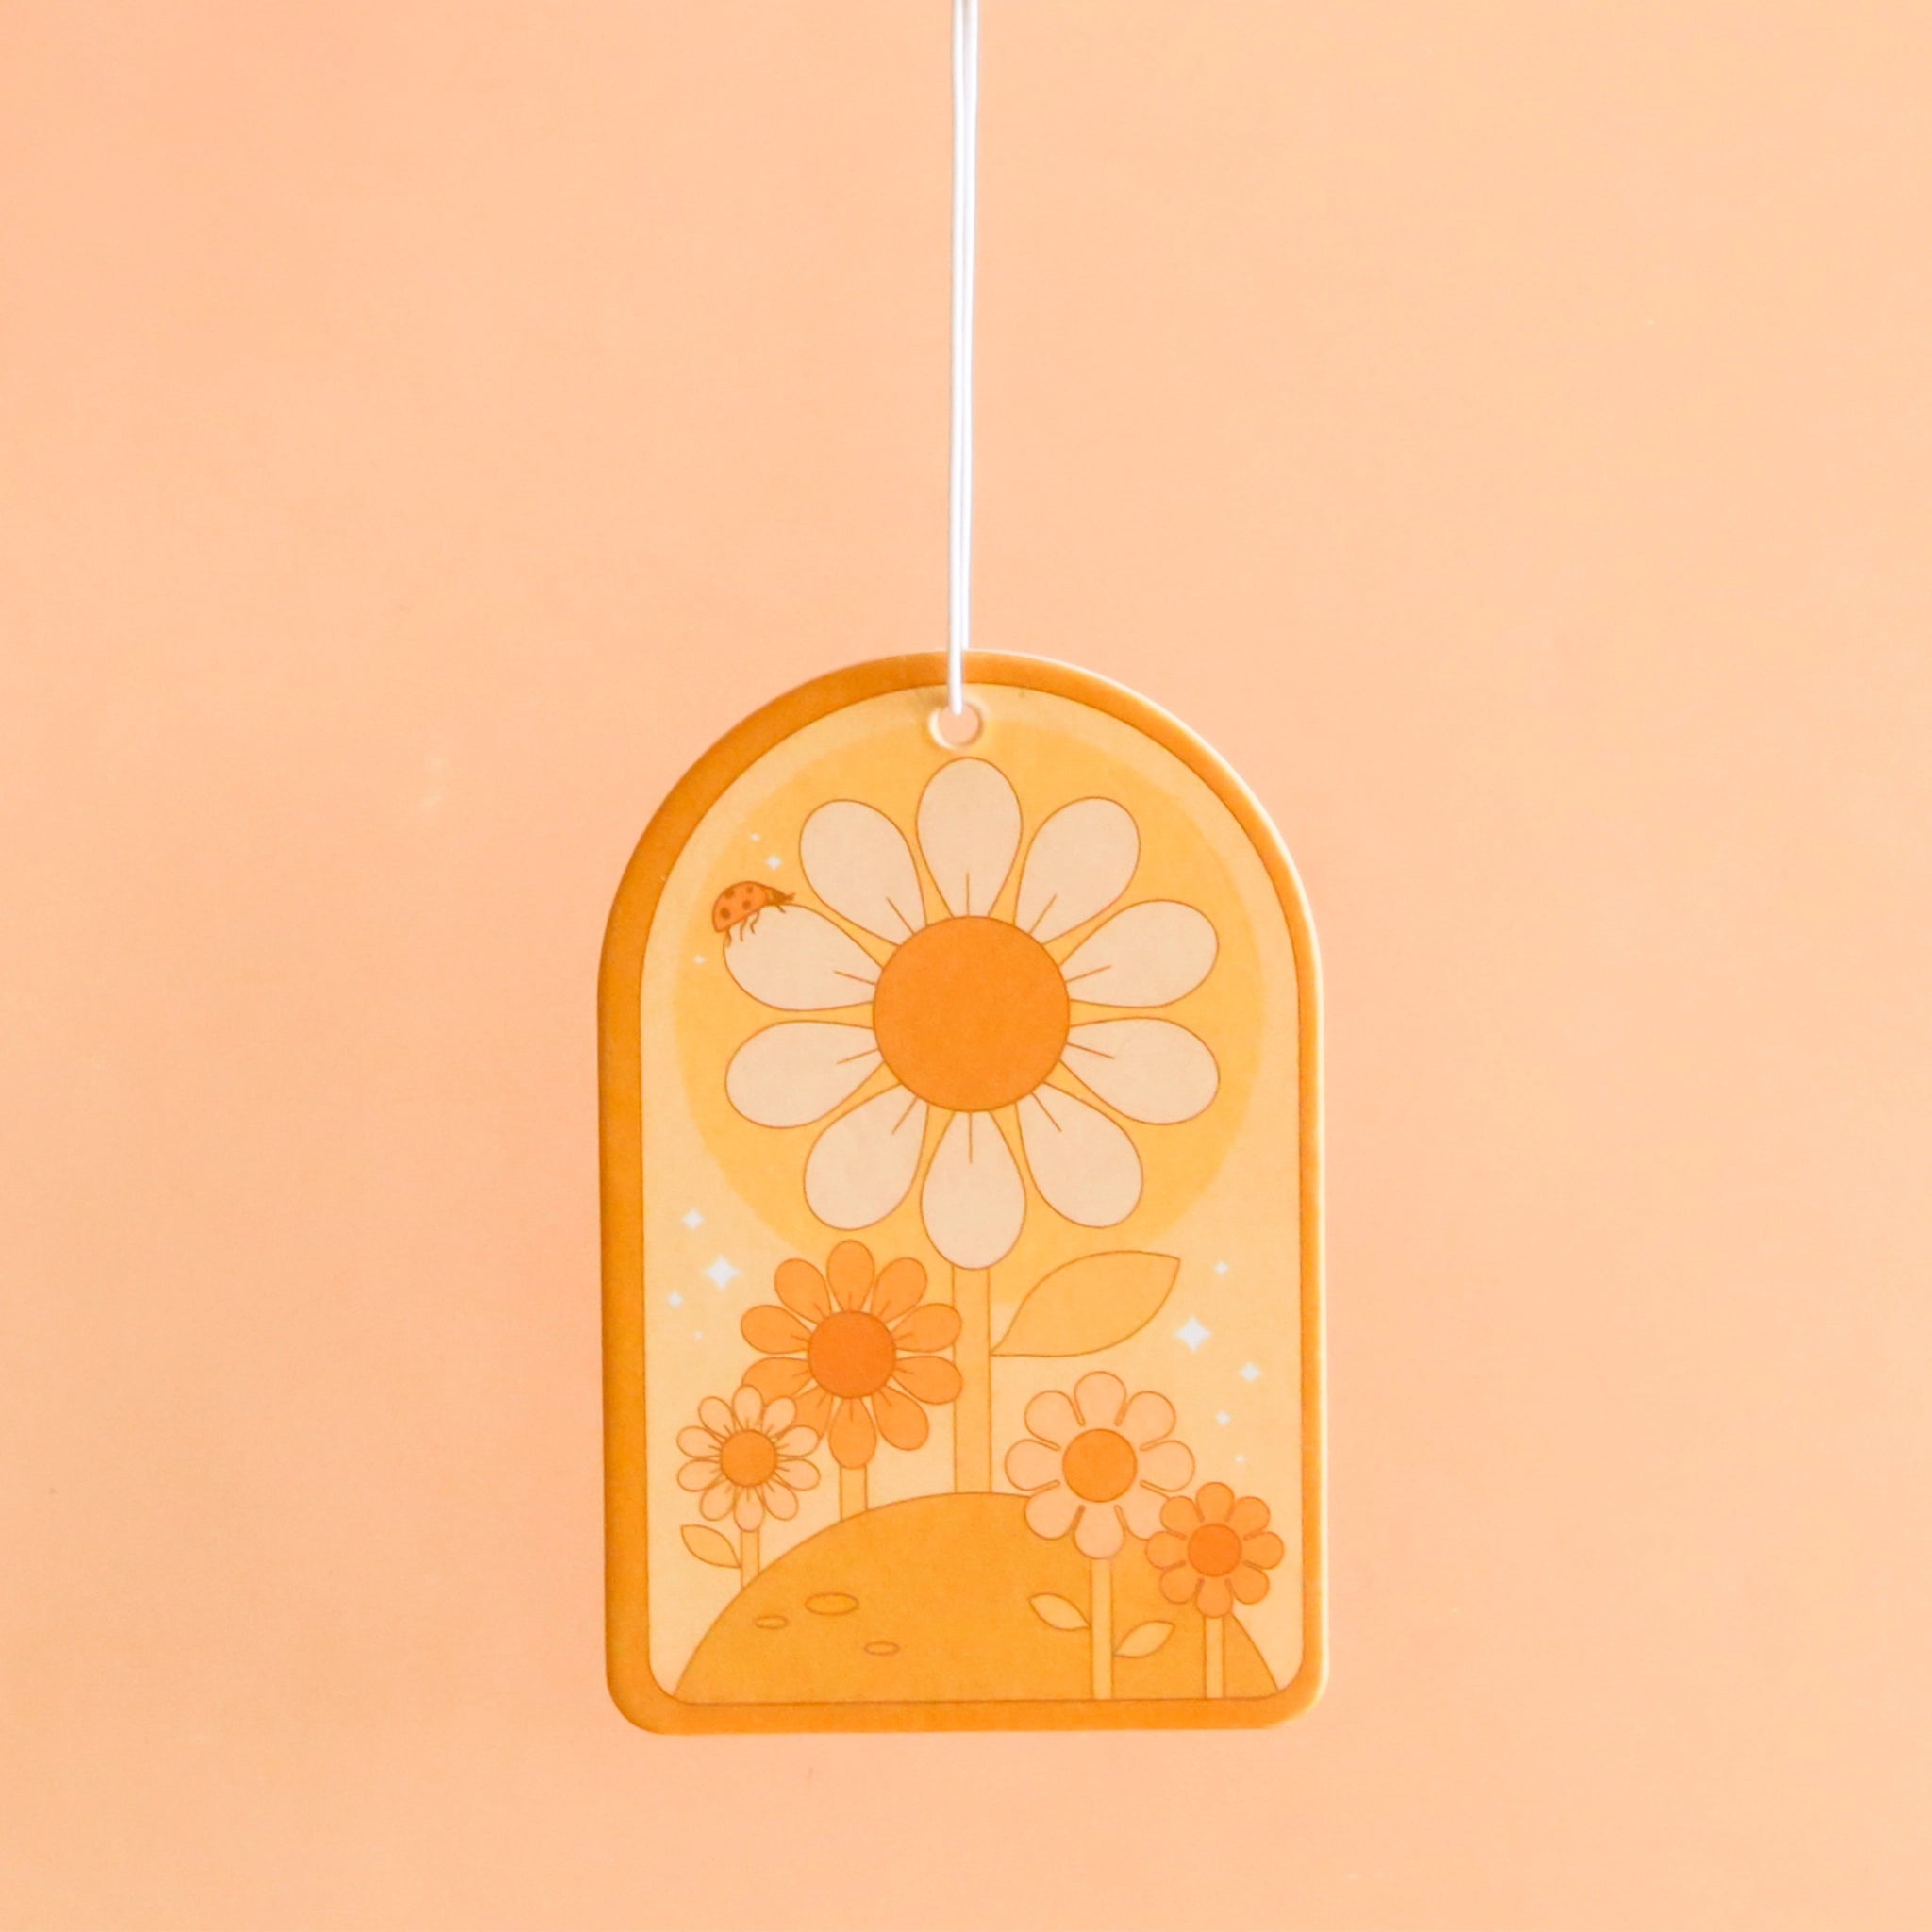 On a peachy background is an arched shaped air freshener with daisy designs and a white elastic loop for hanging.